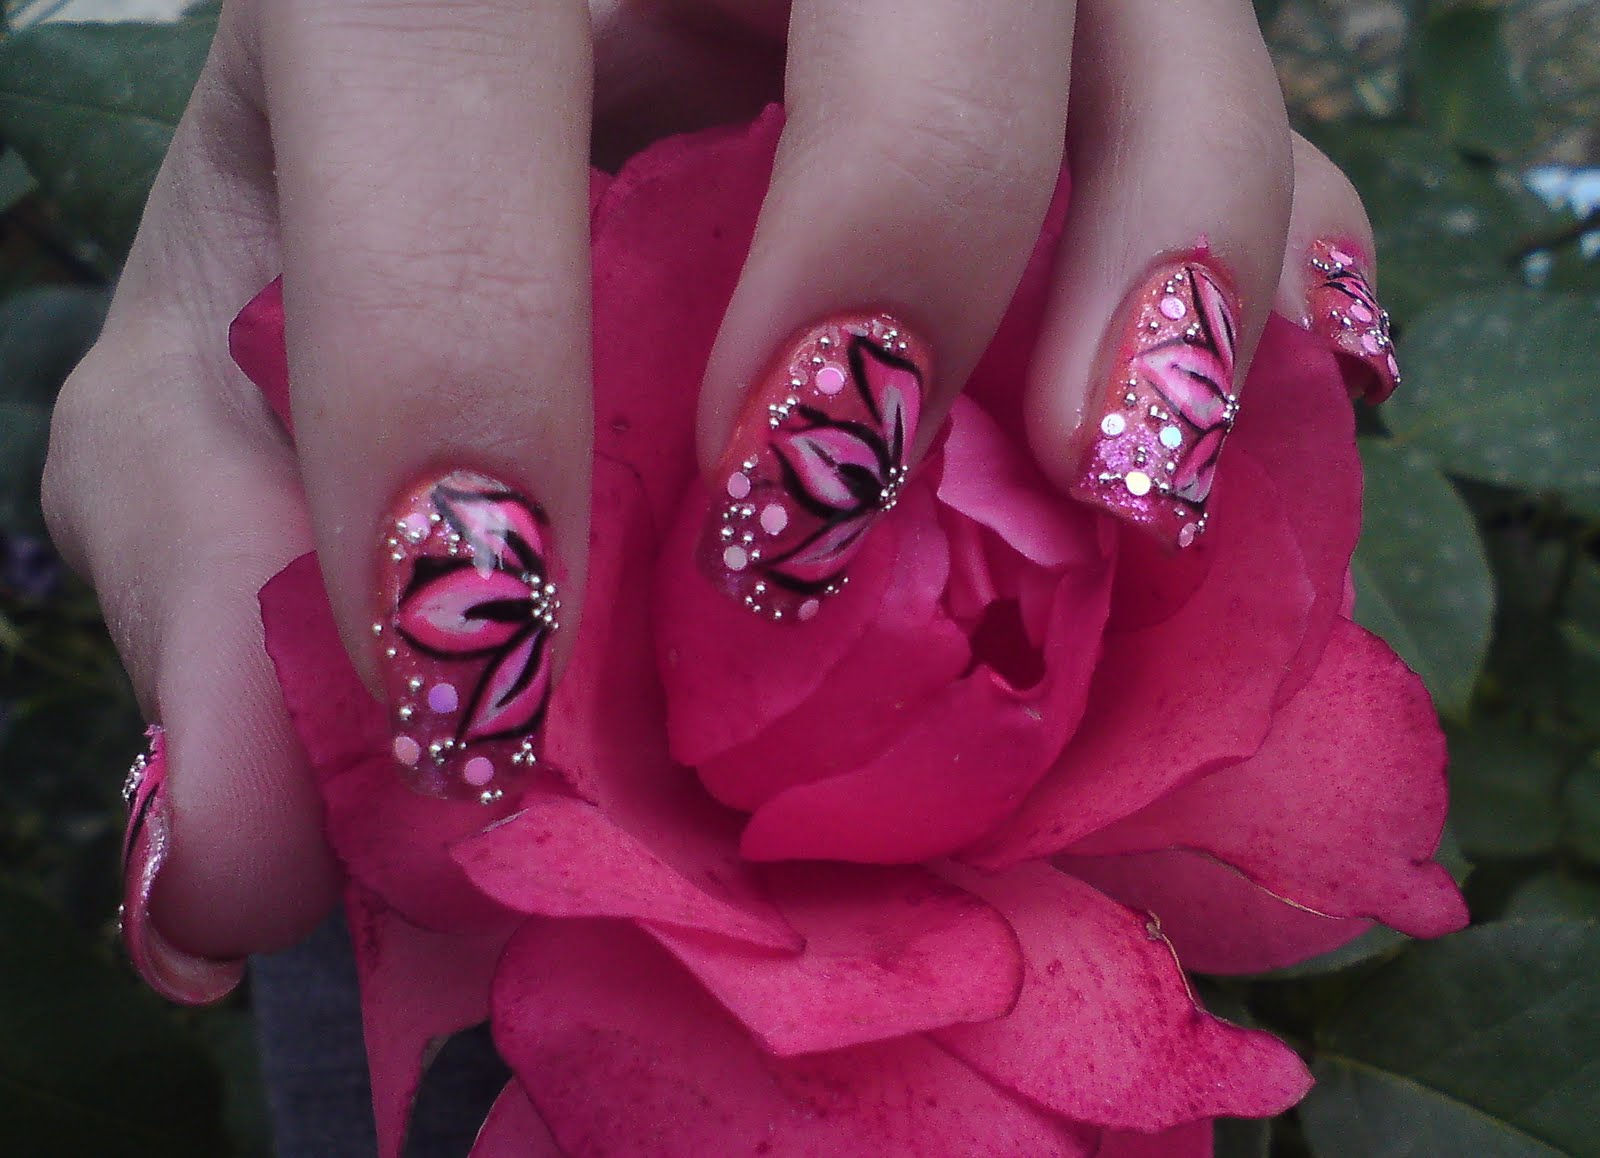 Nail Art Designs with Flowers